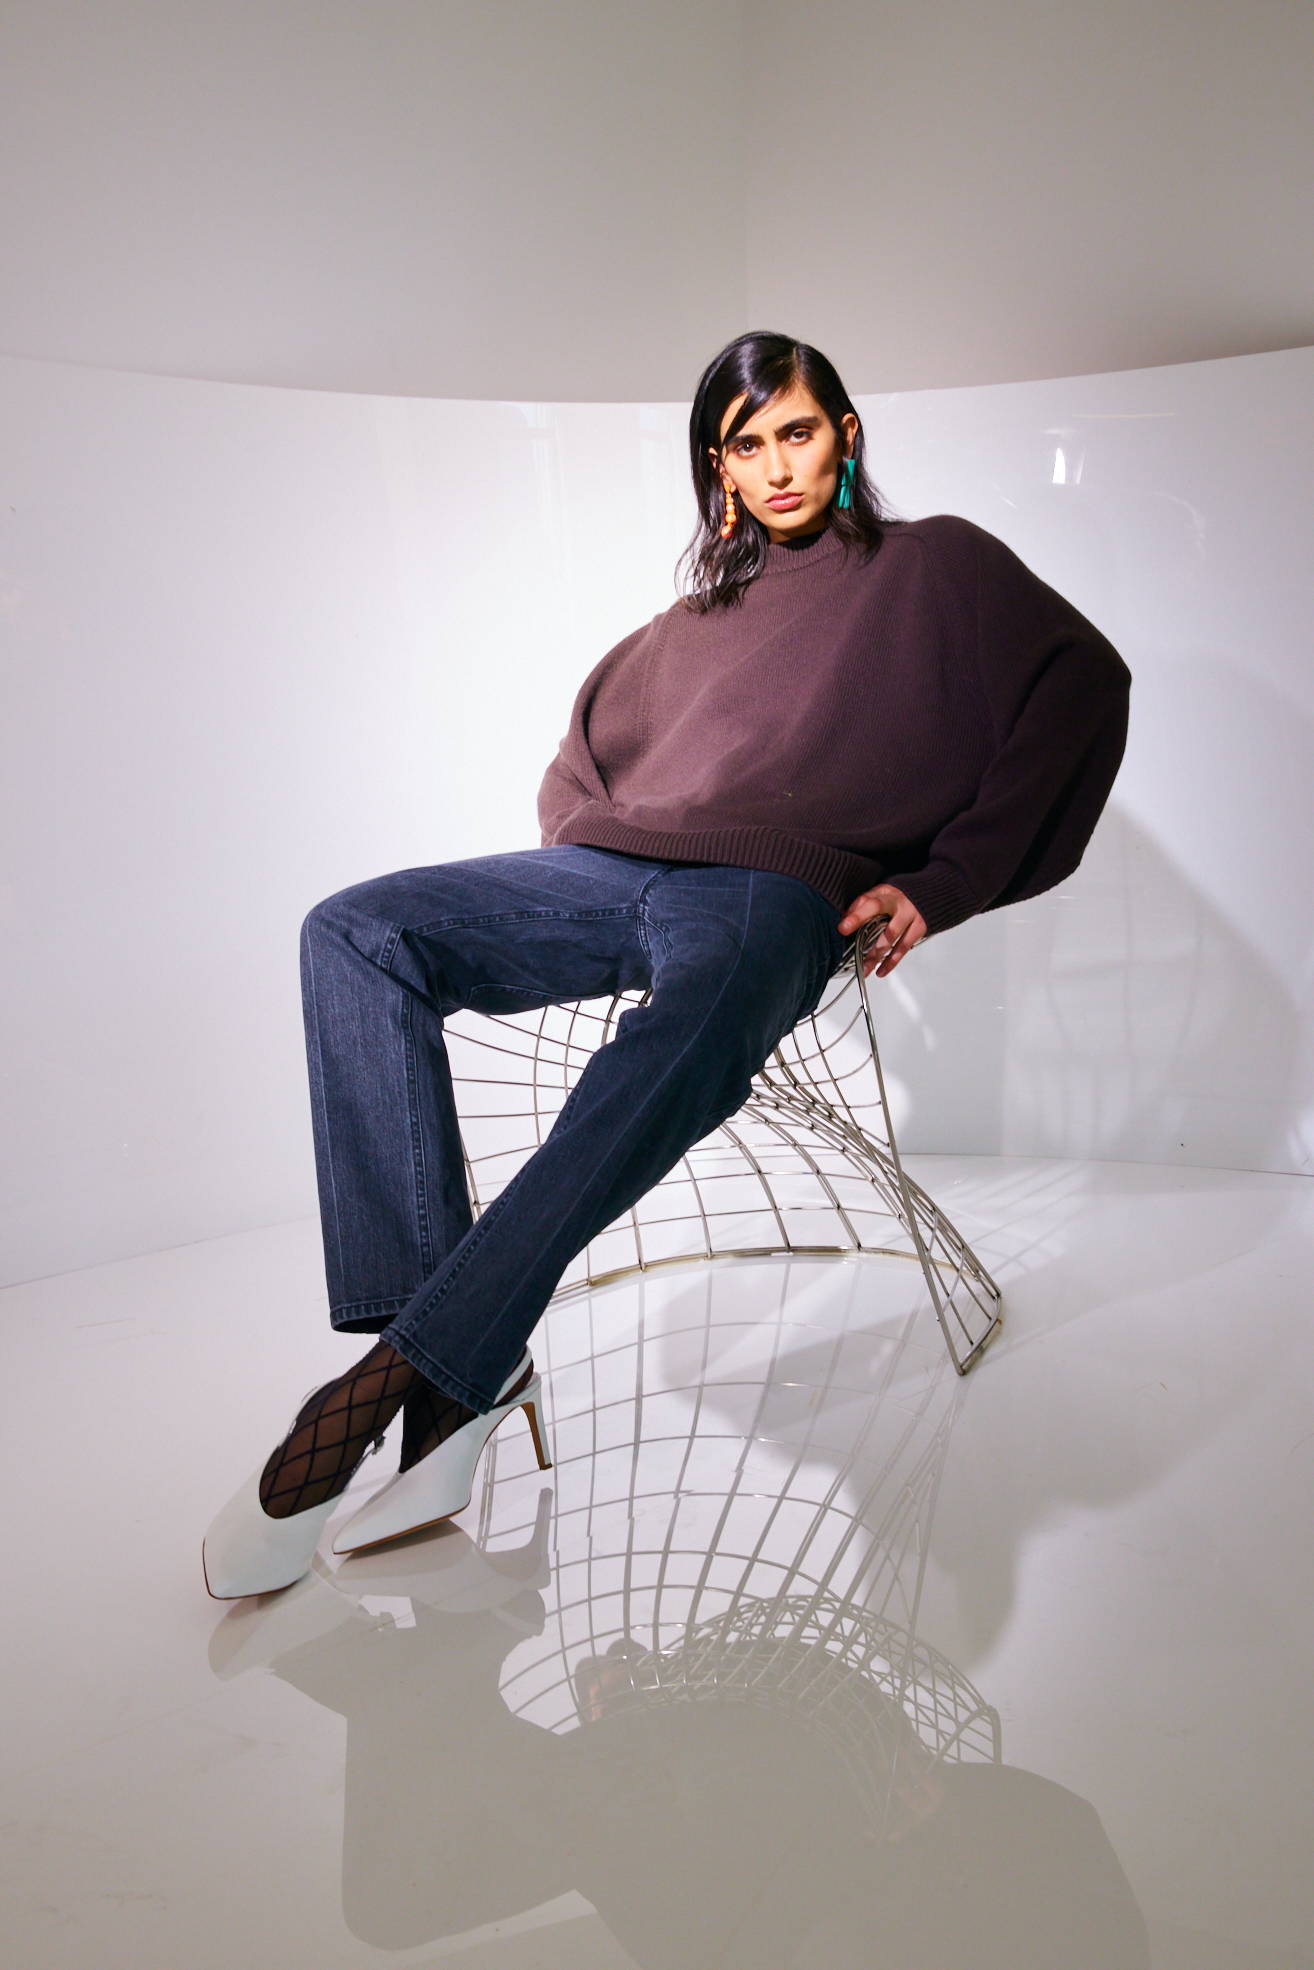 model sitting on chair  on white background